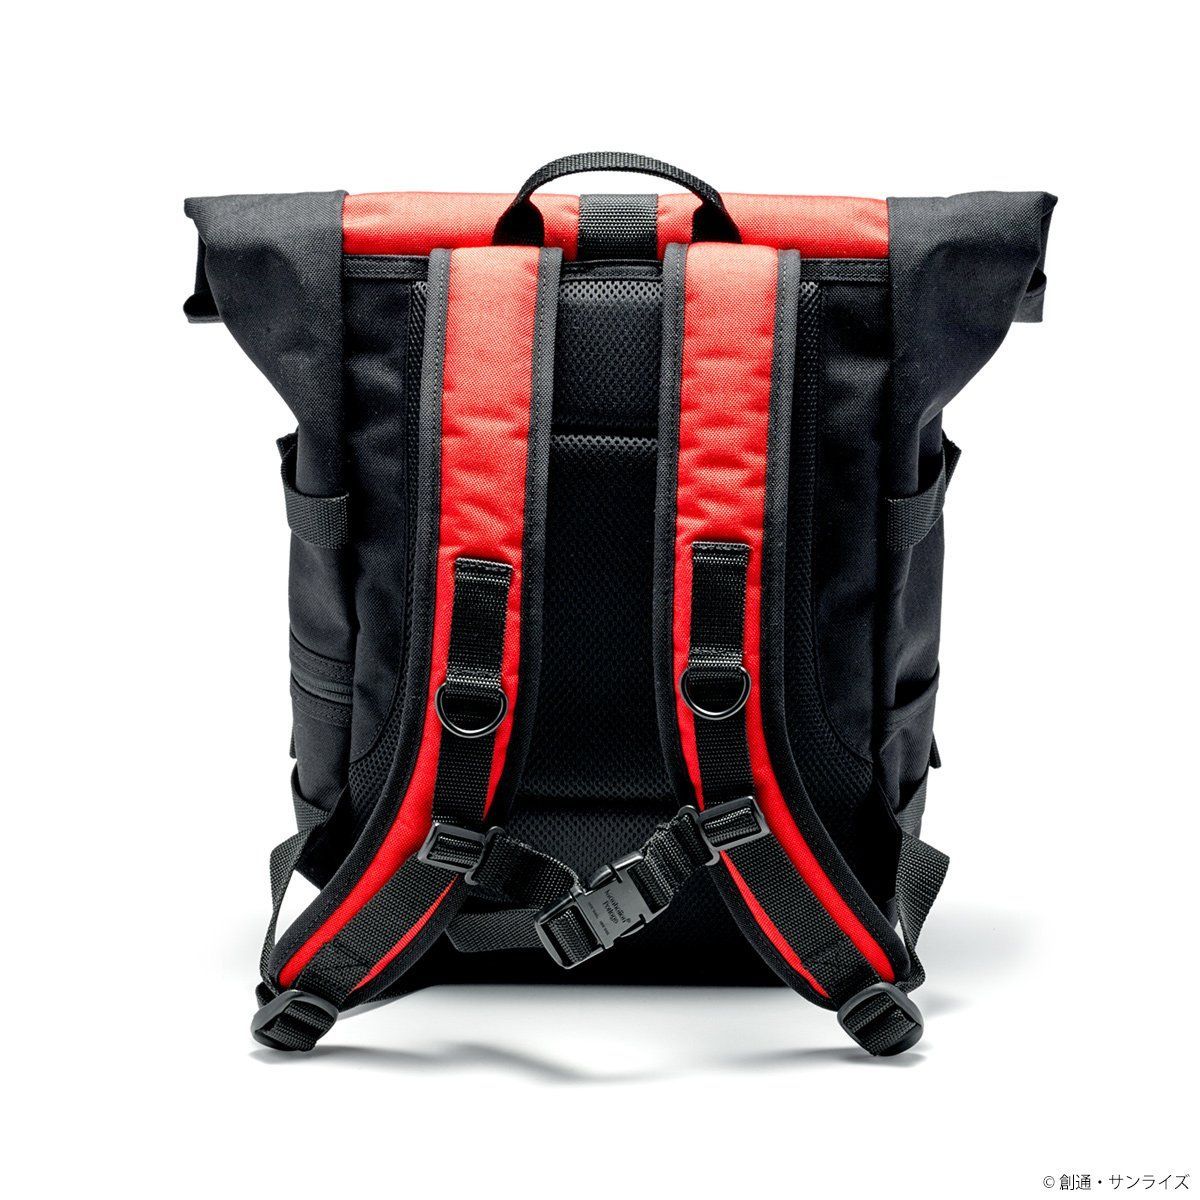 STRICT-G × Manhattan Portage "Mobile Suit Gundam" 40th Anniversary Backpack Zeon Army Model [End of November]